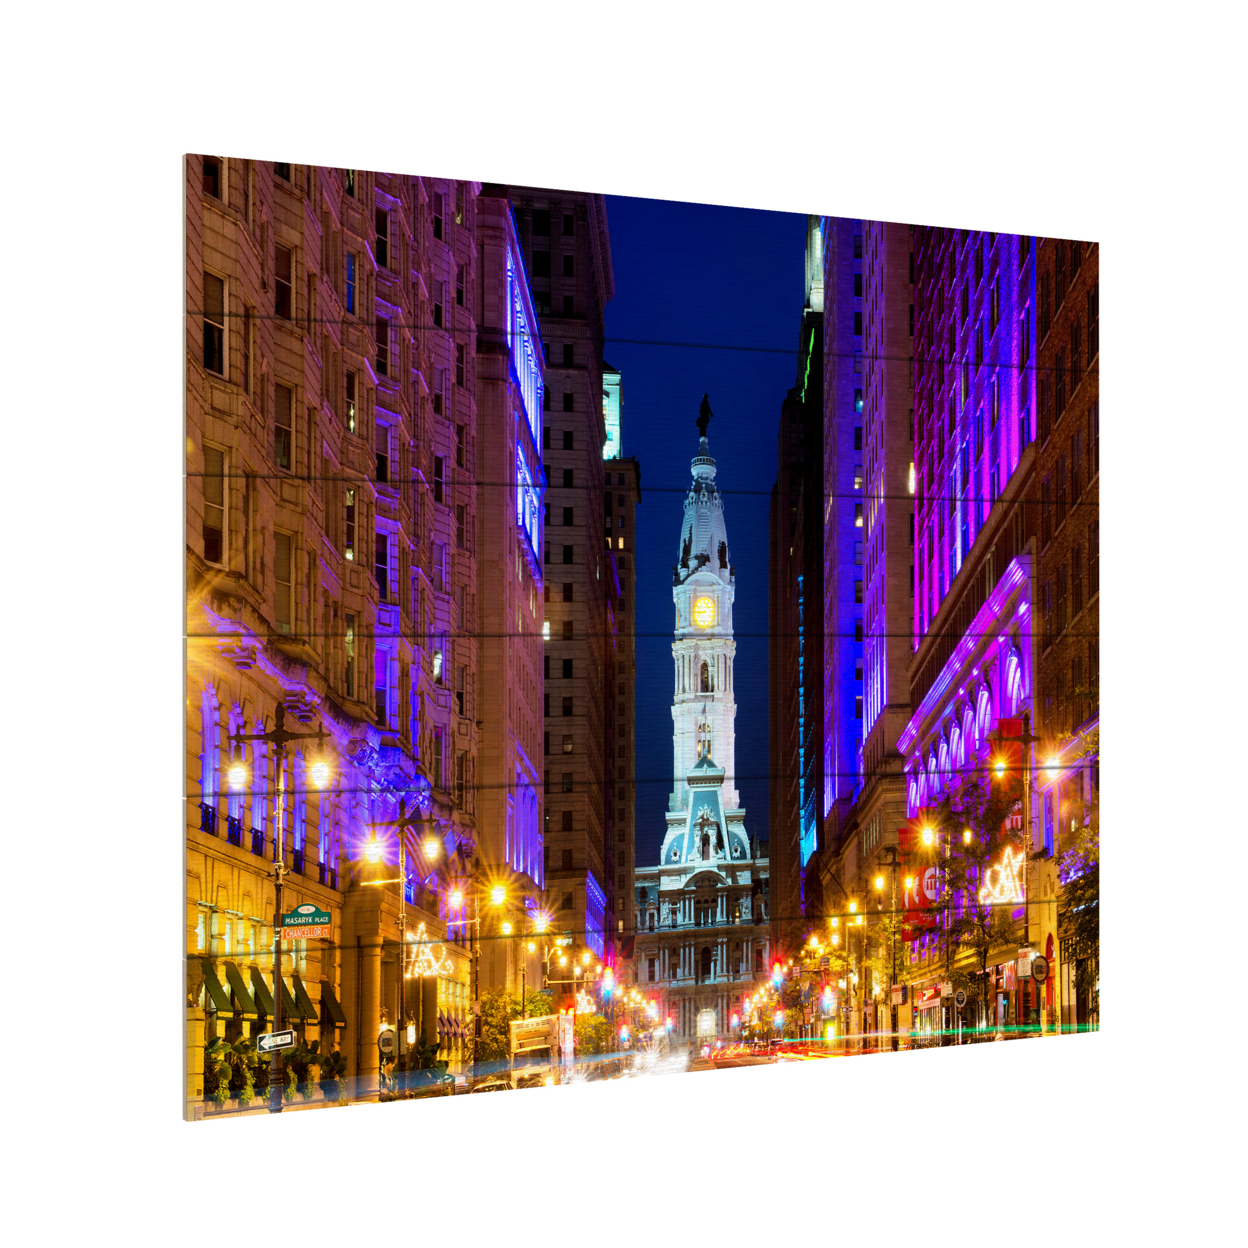 Wooden Slat Art 18 X 22 Inches Titled City Hall Philadelphia Ready To Hang Home Decor Picture